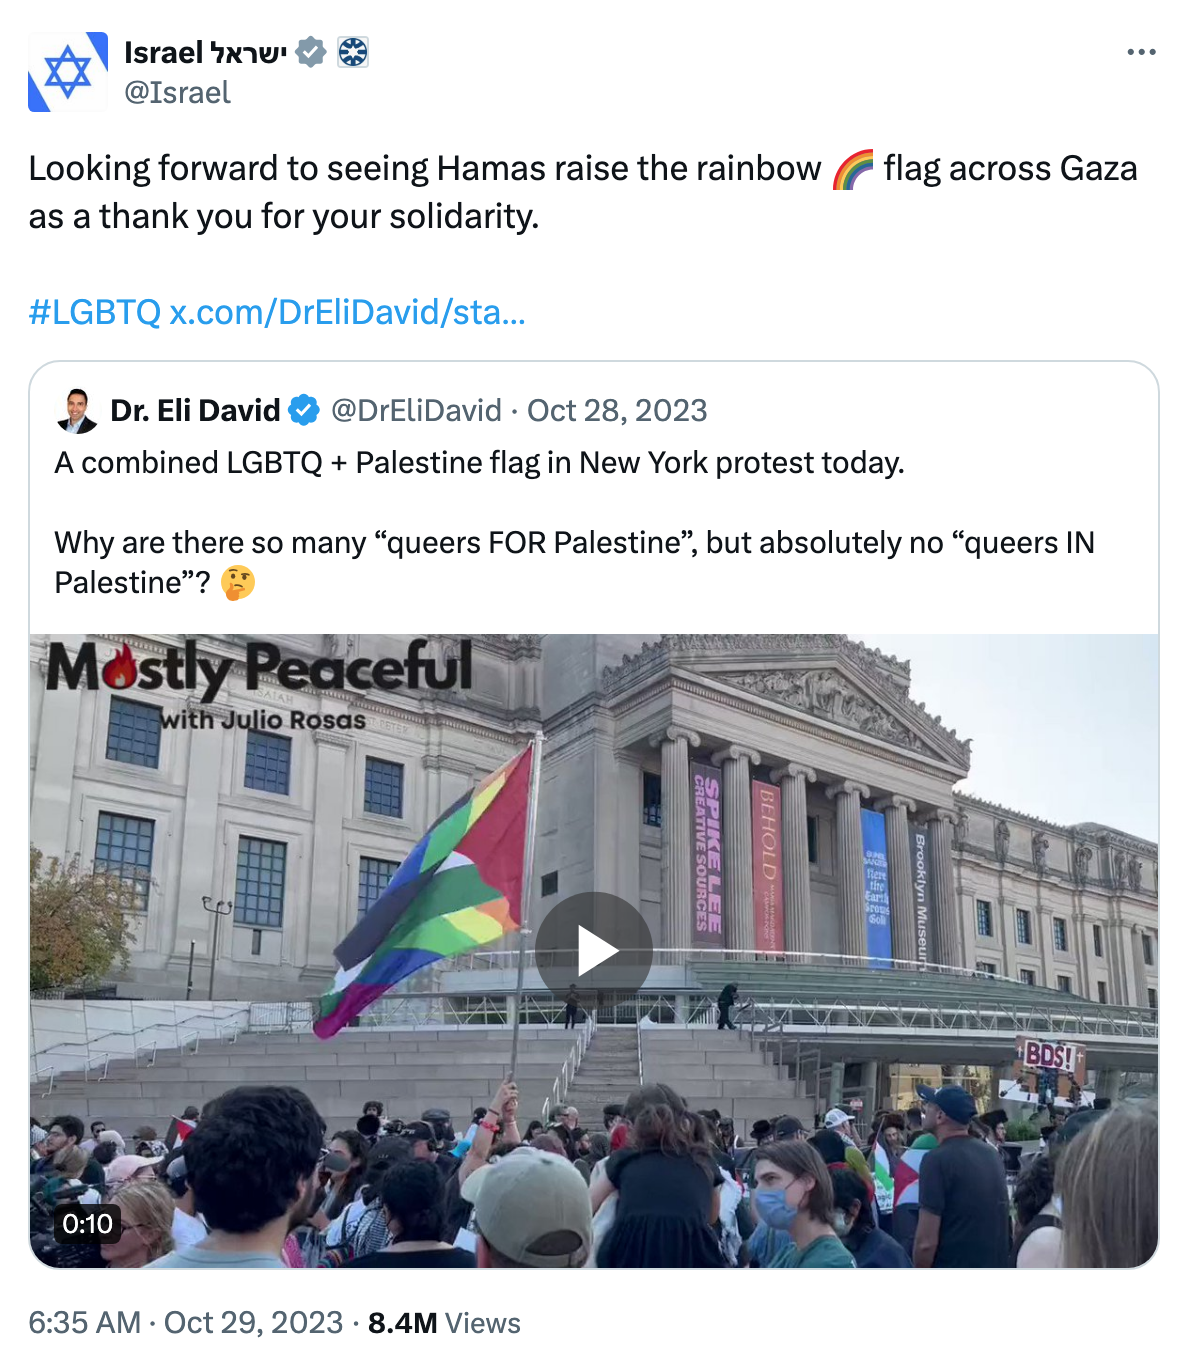 Screenshot of a quote tweet from Israel that mocks the Queers for Palestine, saying, “Looking forward to seeing Hamas raise the rainbow [rainbow emoji] flag across Gaza as a thank you for your solidarity.”